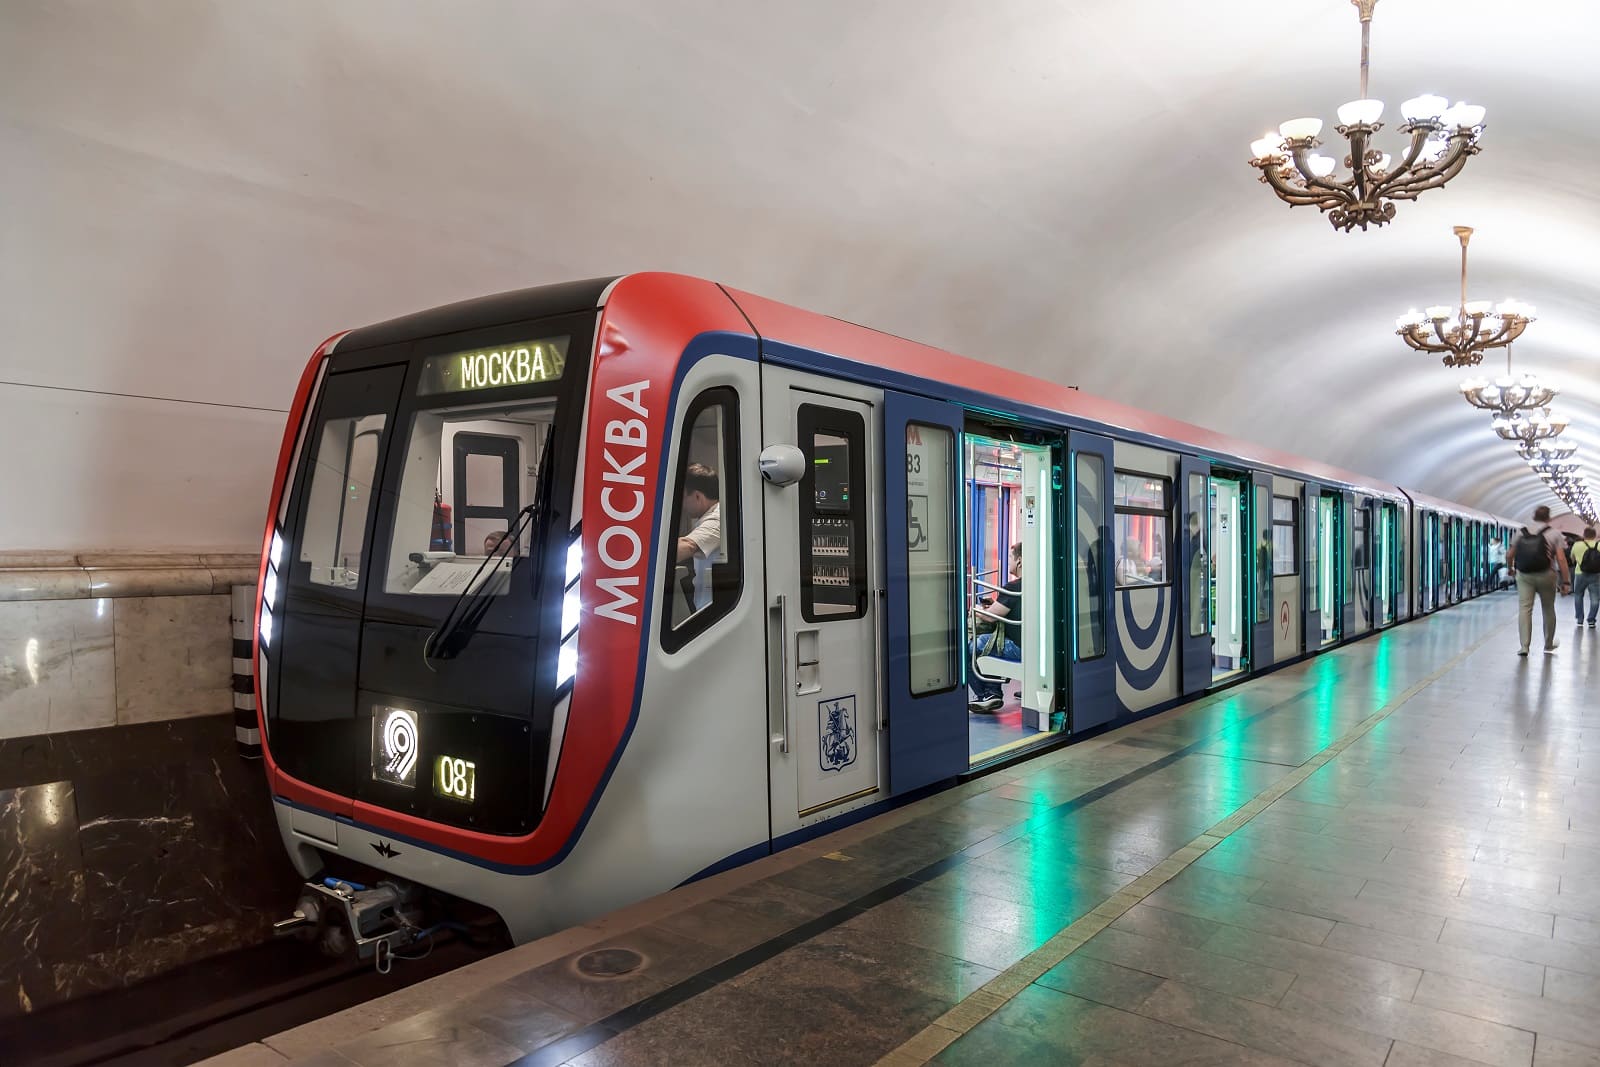 <p><span>Moscow’s Metro is a transport system and a showcase of Soviet-era art and architecture. It’s one of the deepest metro systems in the world, and its stations are famous for their ornate designs. </span></p> <p><b>Insider’s Tip: </b><span>Download the Moscow Metro app for real-time navigation. </span></p> <p><b>When to Travel: </b><span>To avoid crowds, steer clear of rush hour times, particularly in the mornings and evenings. </span></p>